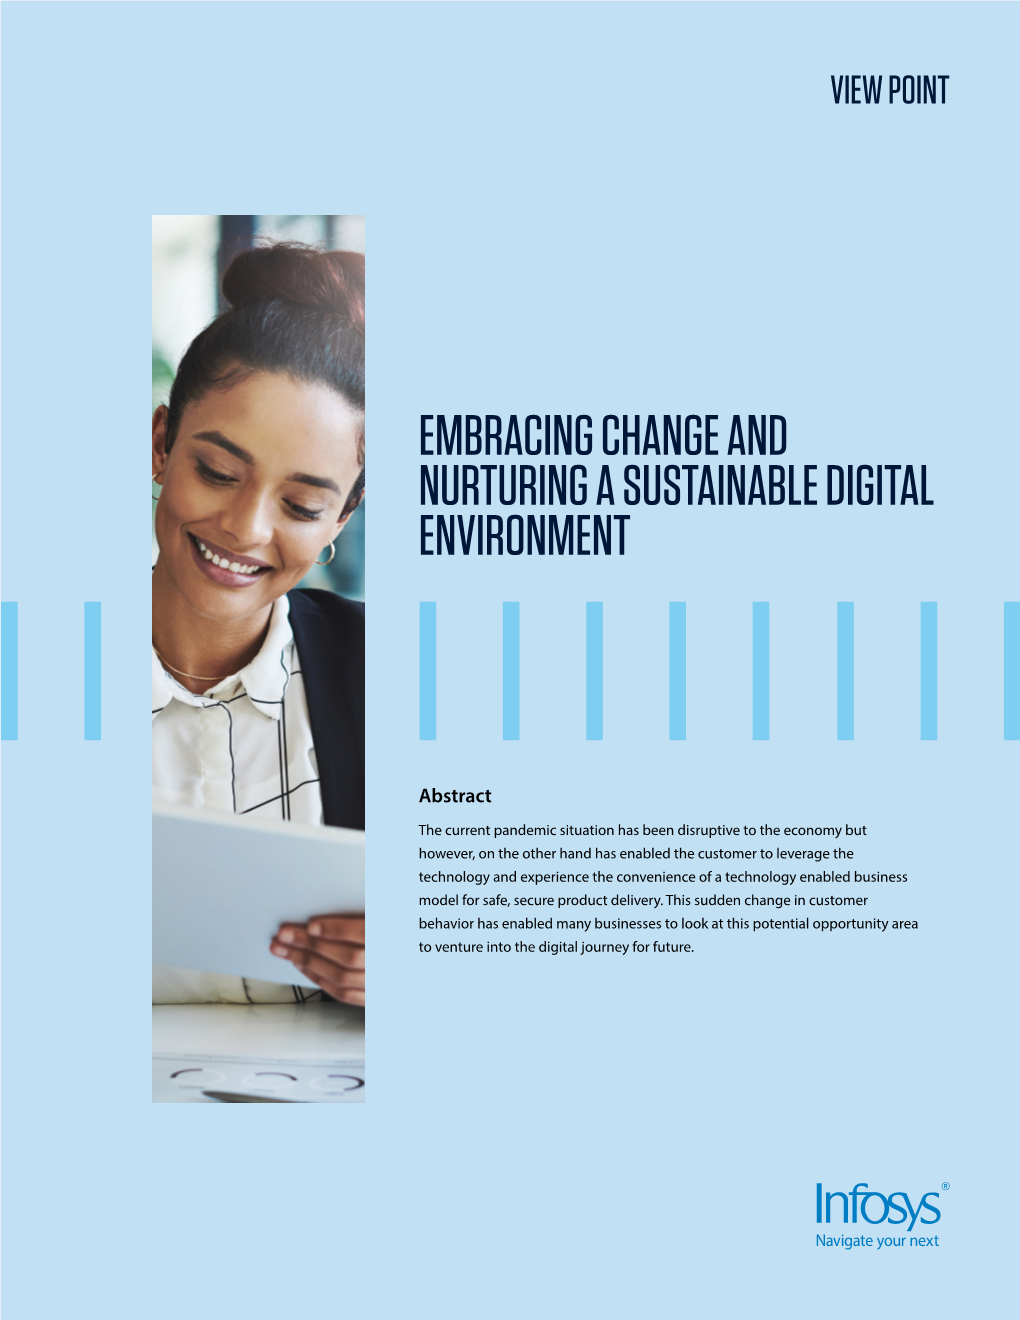 Embracing Change and Nurturing a Sustainable Digital Environment